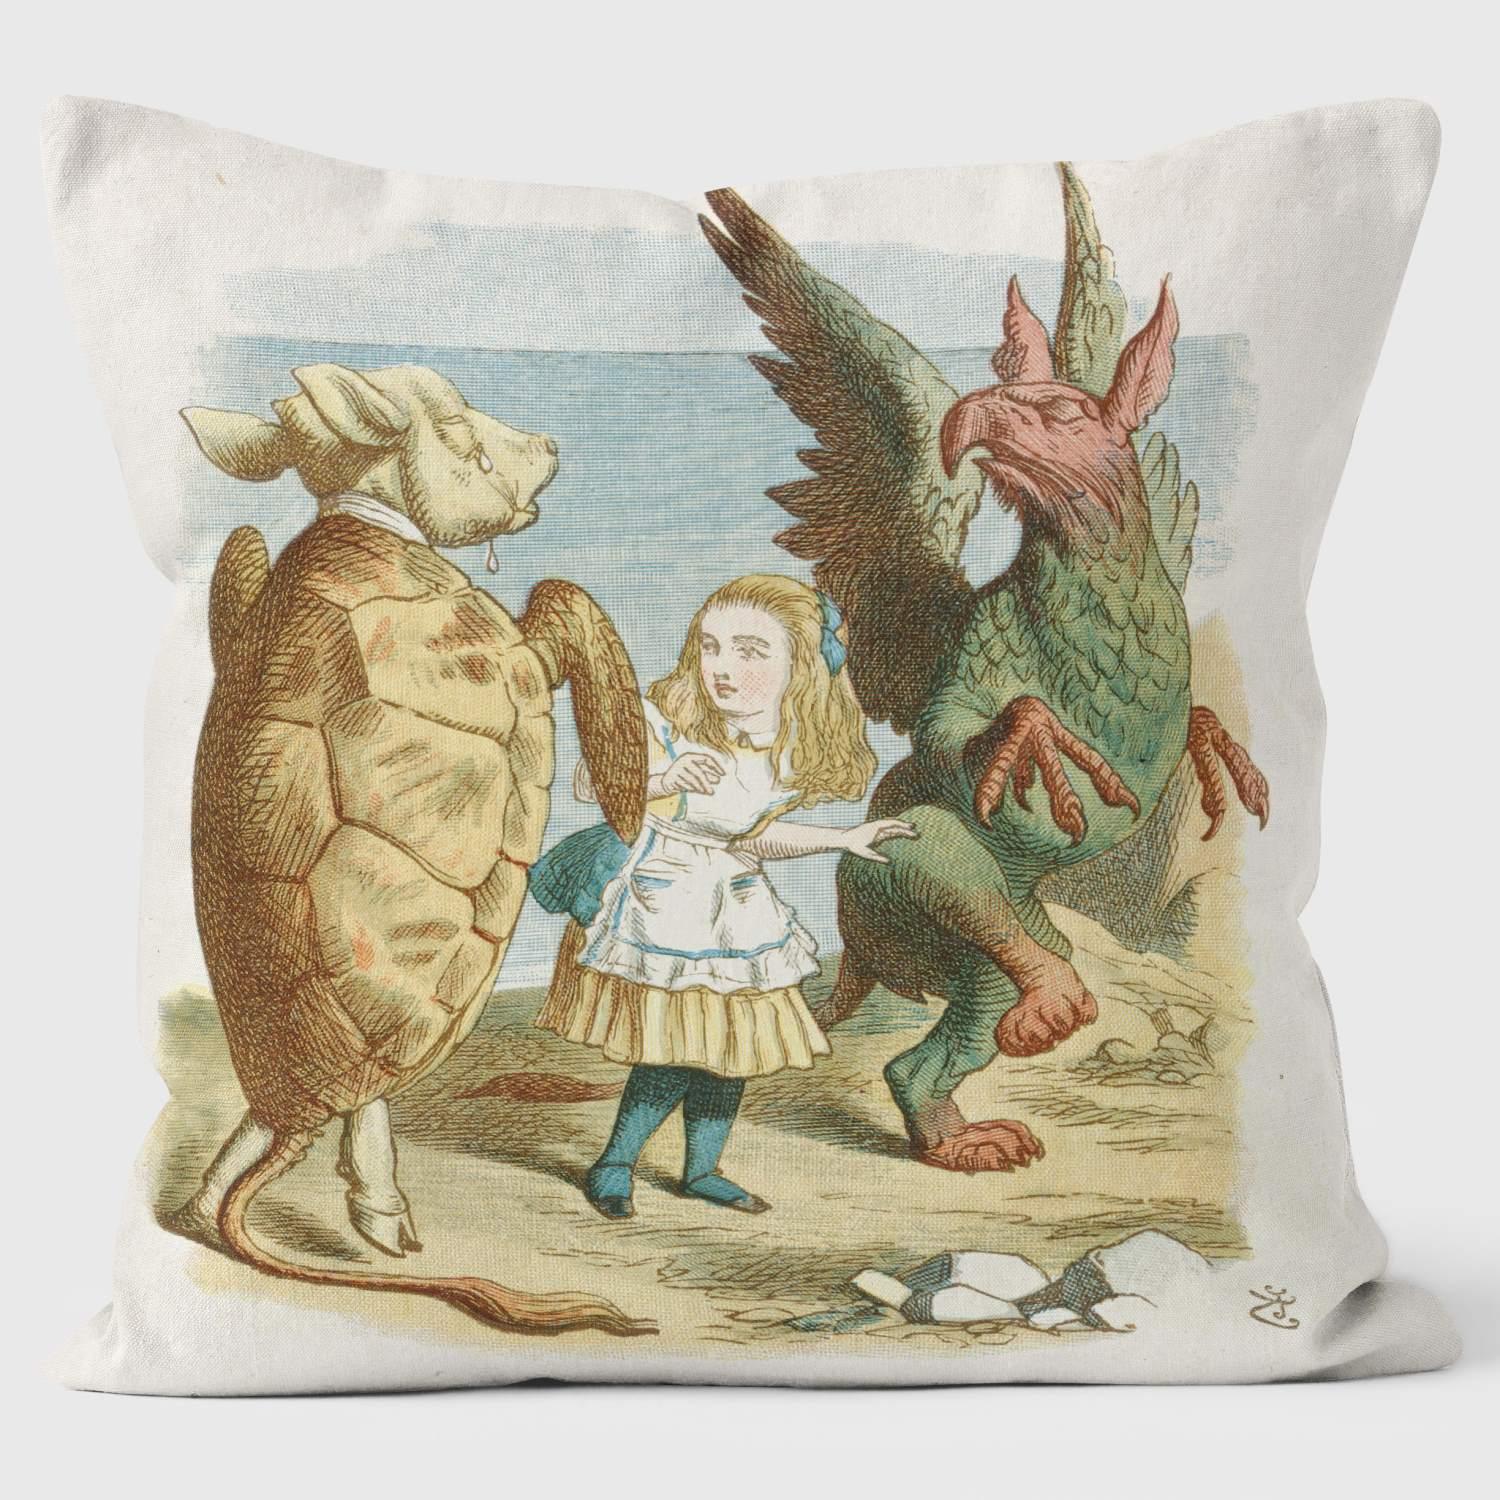 Turtle and Gryphon - Alice in Wonderland - Lewis Carroll Cushion - Handmade Cushions UK - WeLoveCushions